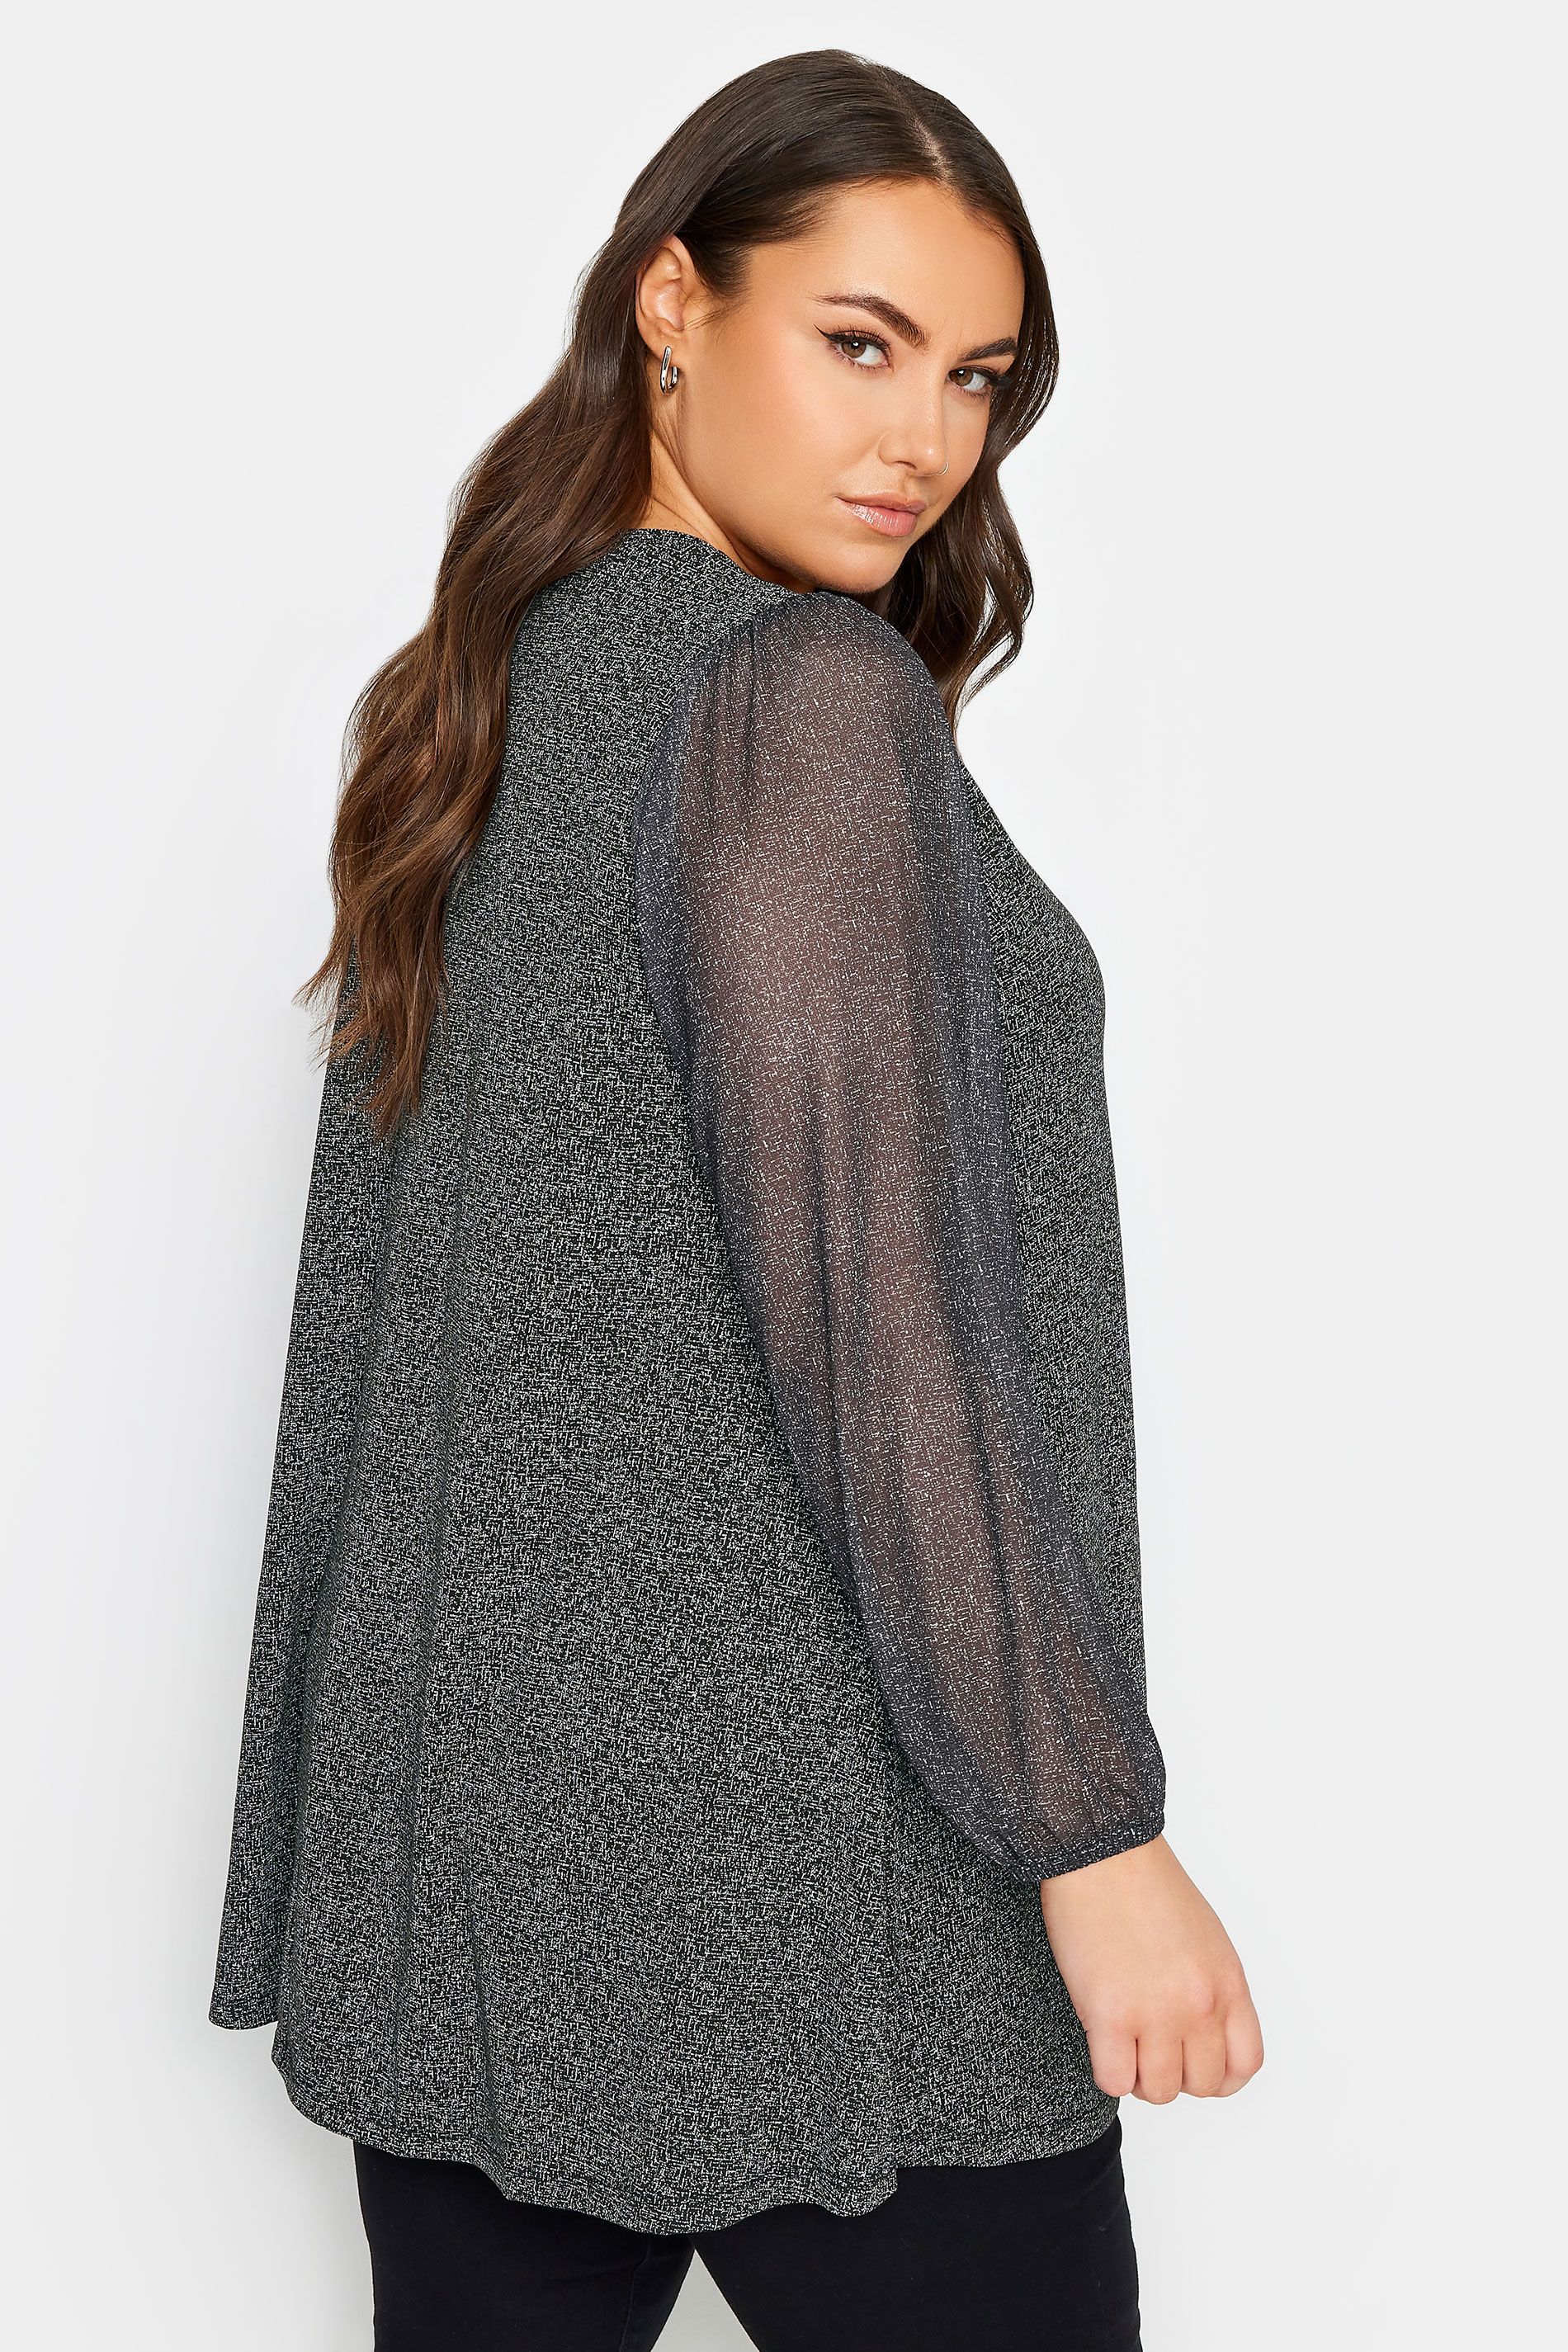 YOURS Plus Size Grey Mesh Sleeve Pleated Top | Yours Clothing 3